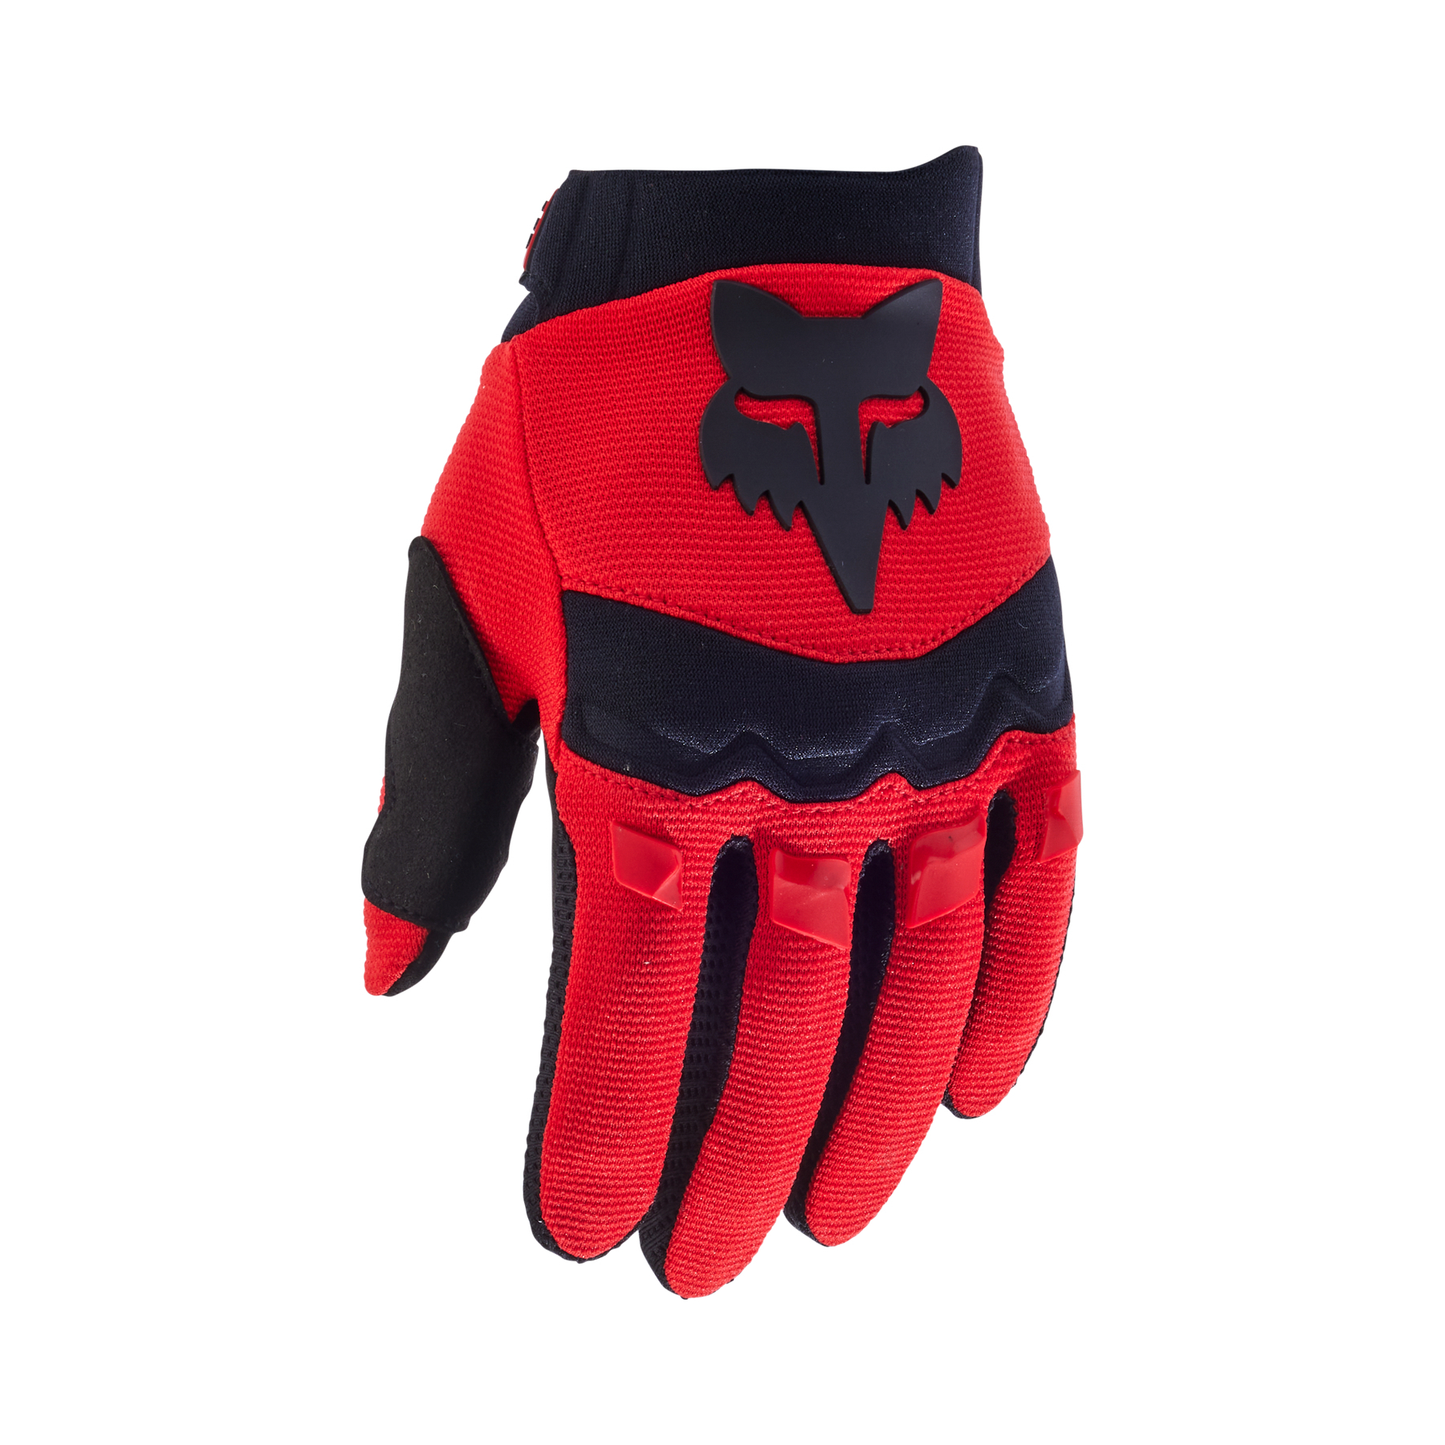 Fox Dirtpaw Youth Gloves - Youth XS - Flo Red - Image 1